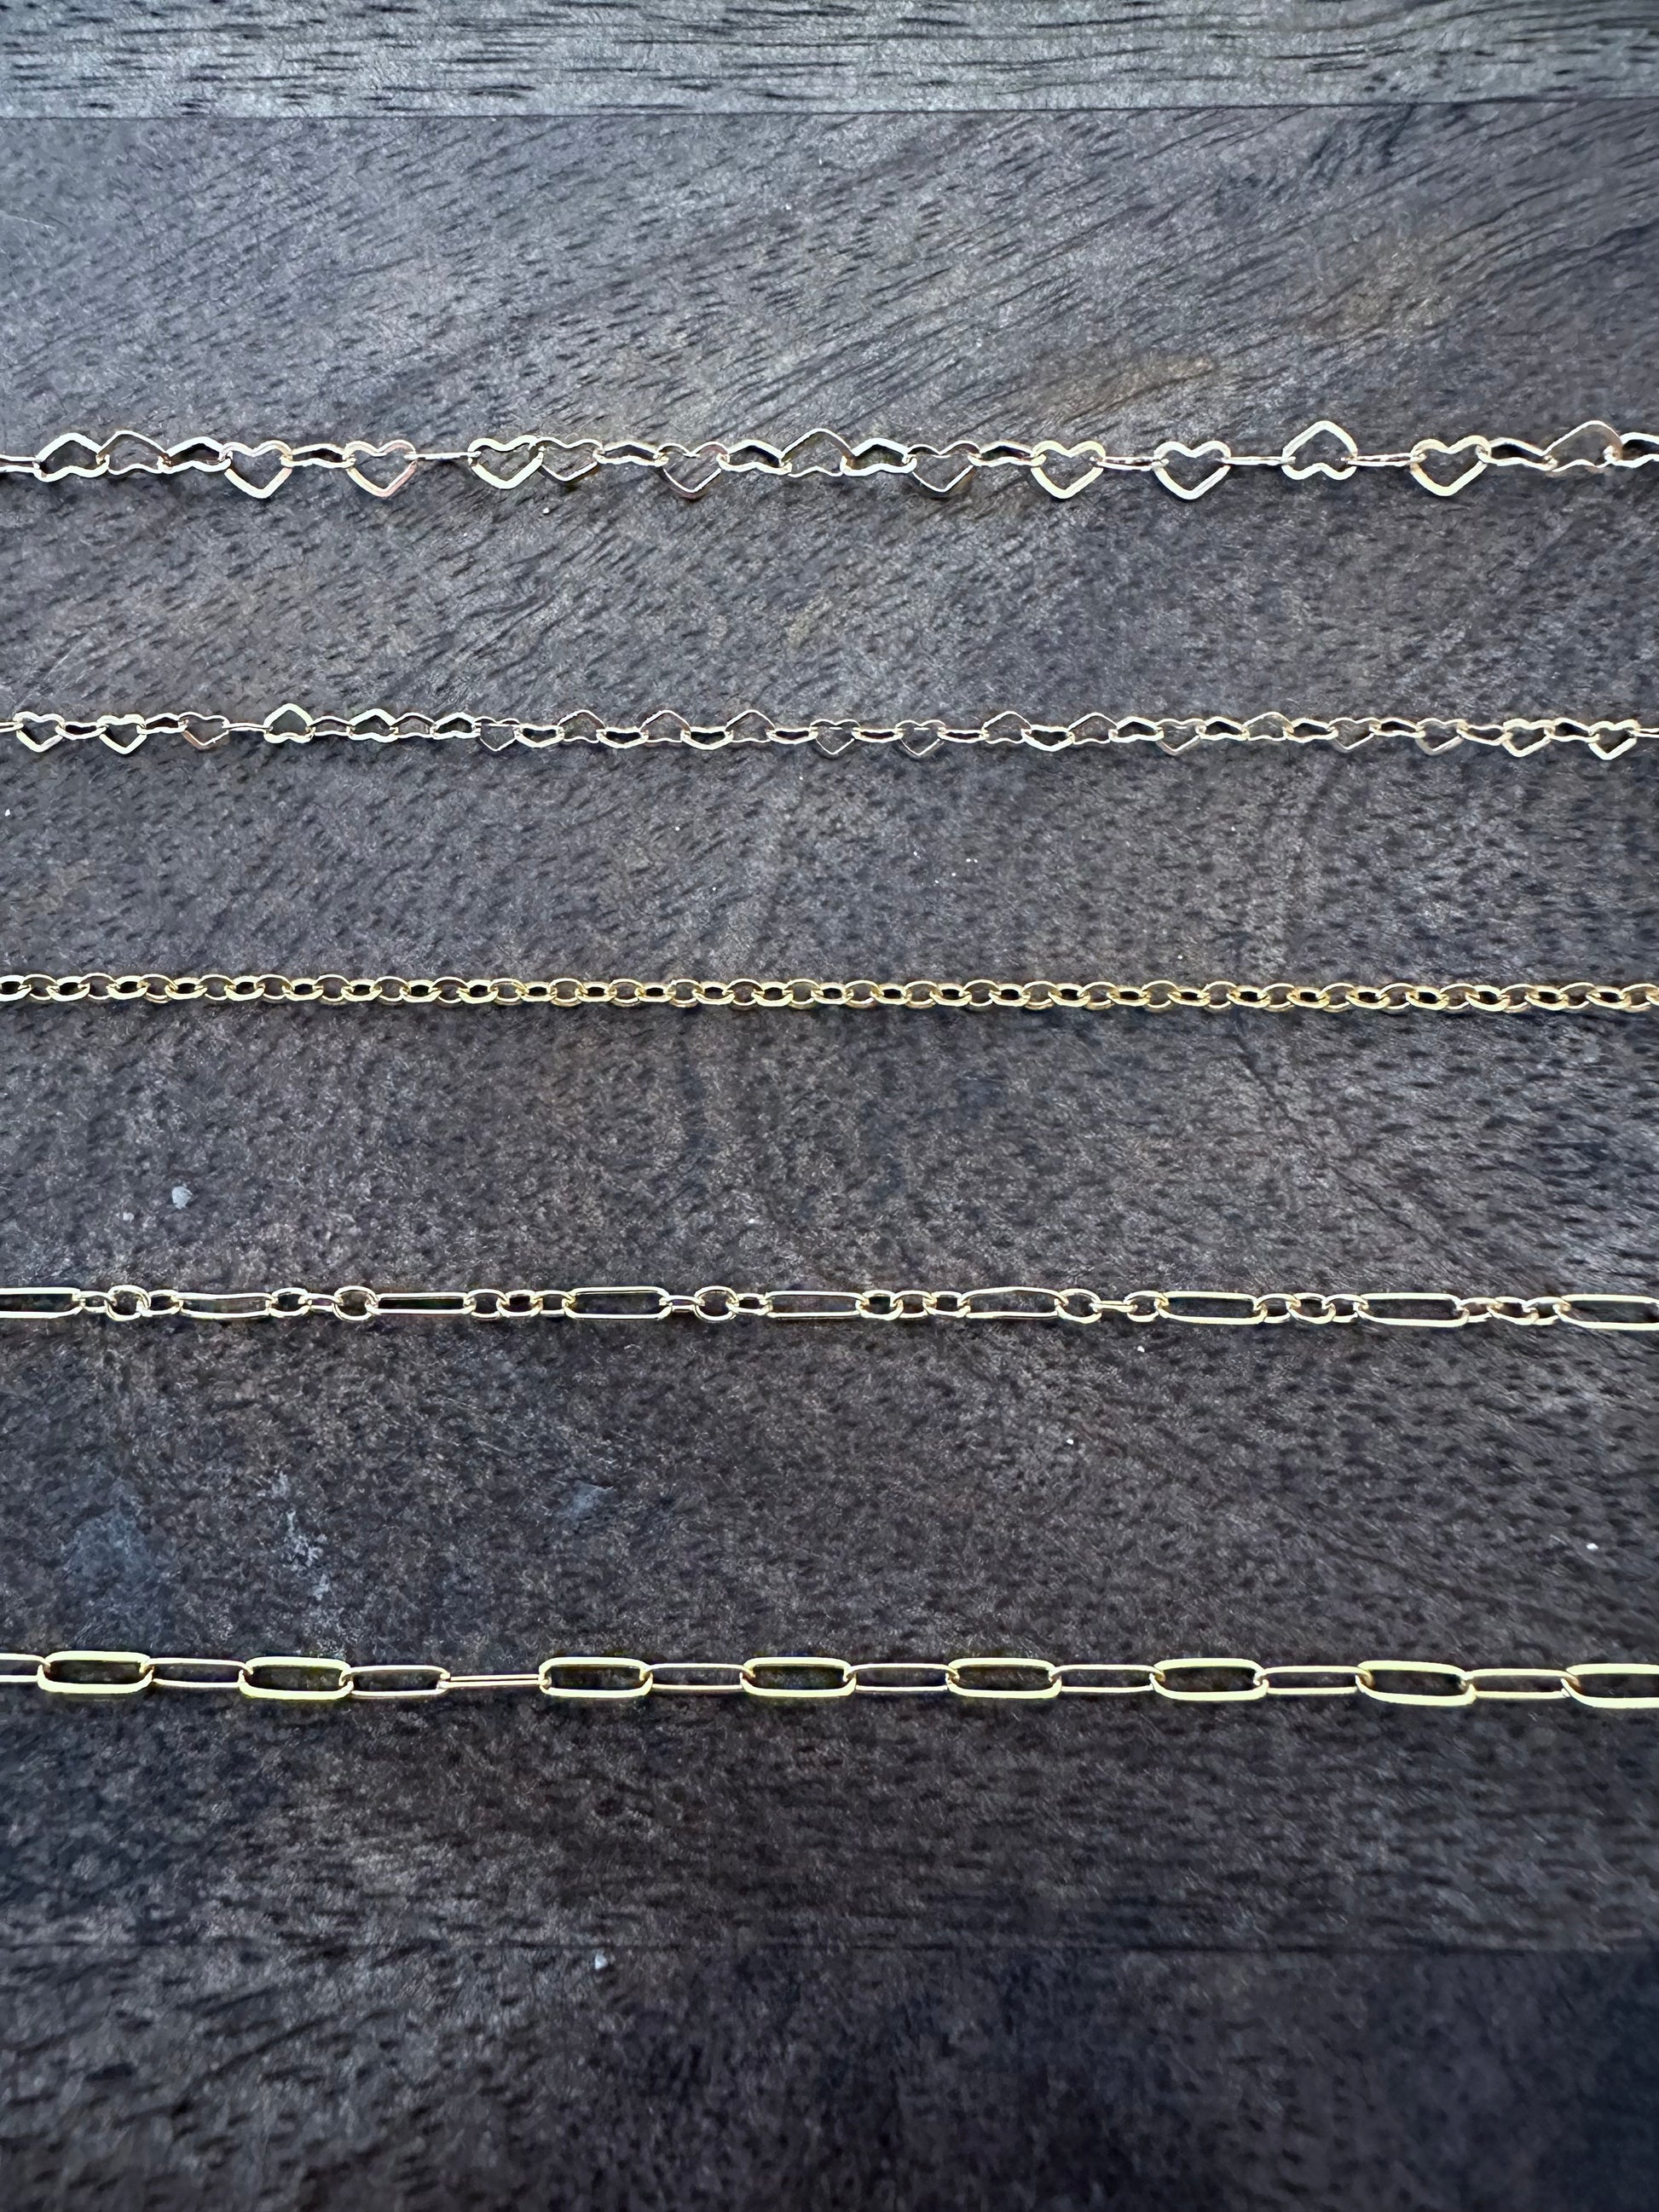 five different chains laid out in a row on a grey back ground. the firs chain is made by linked hearts, the second is smaller linked hearts, third is a small circular chain, the fourth has one long link then three circular links in an alternating pattern, the fifth is a paperclip chain all long links